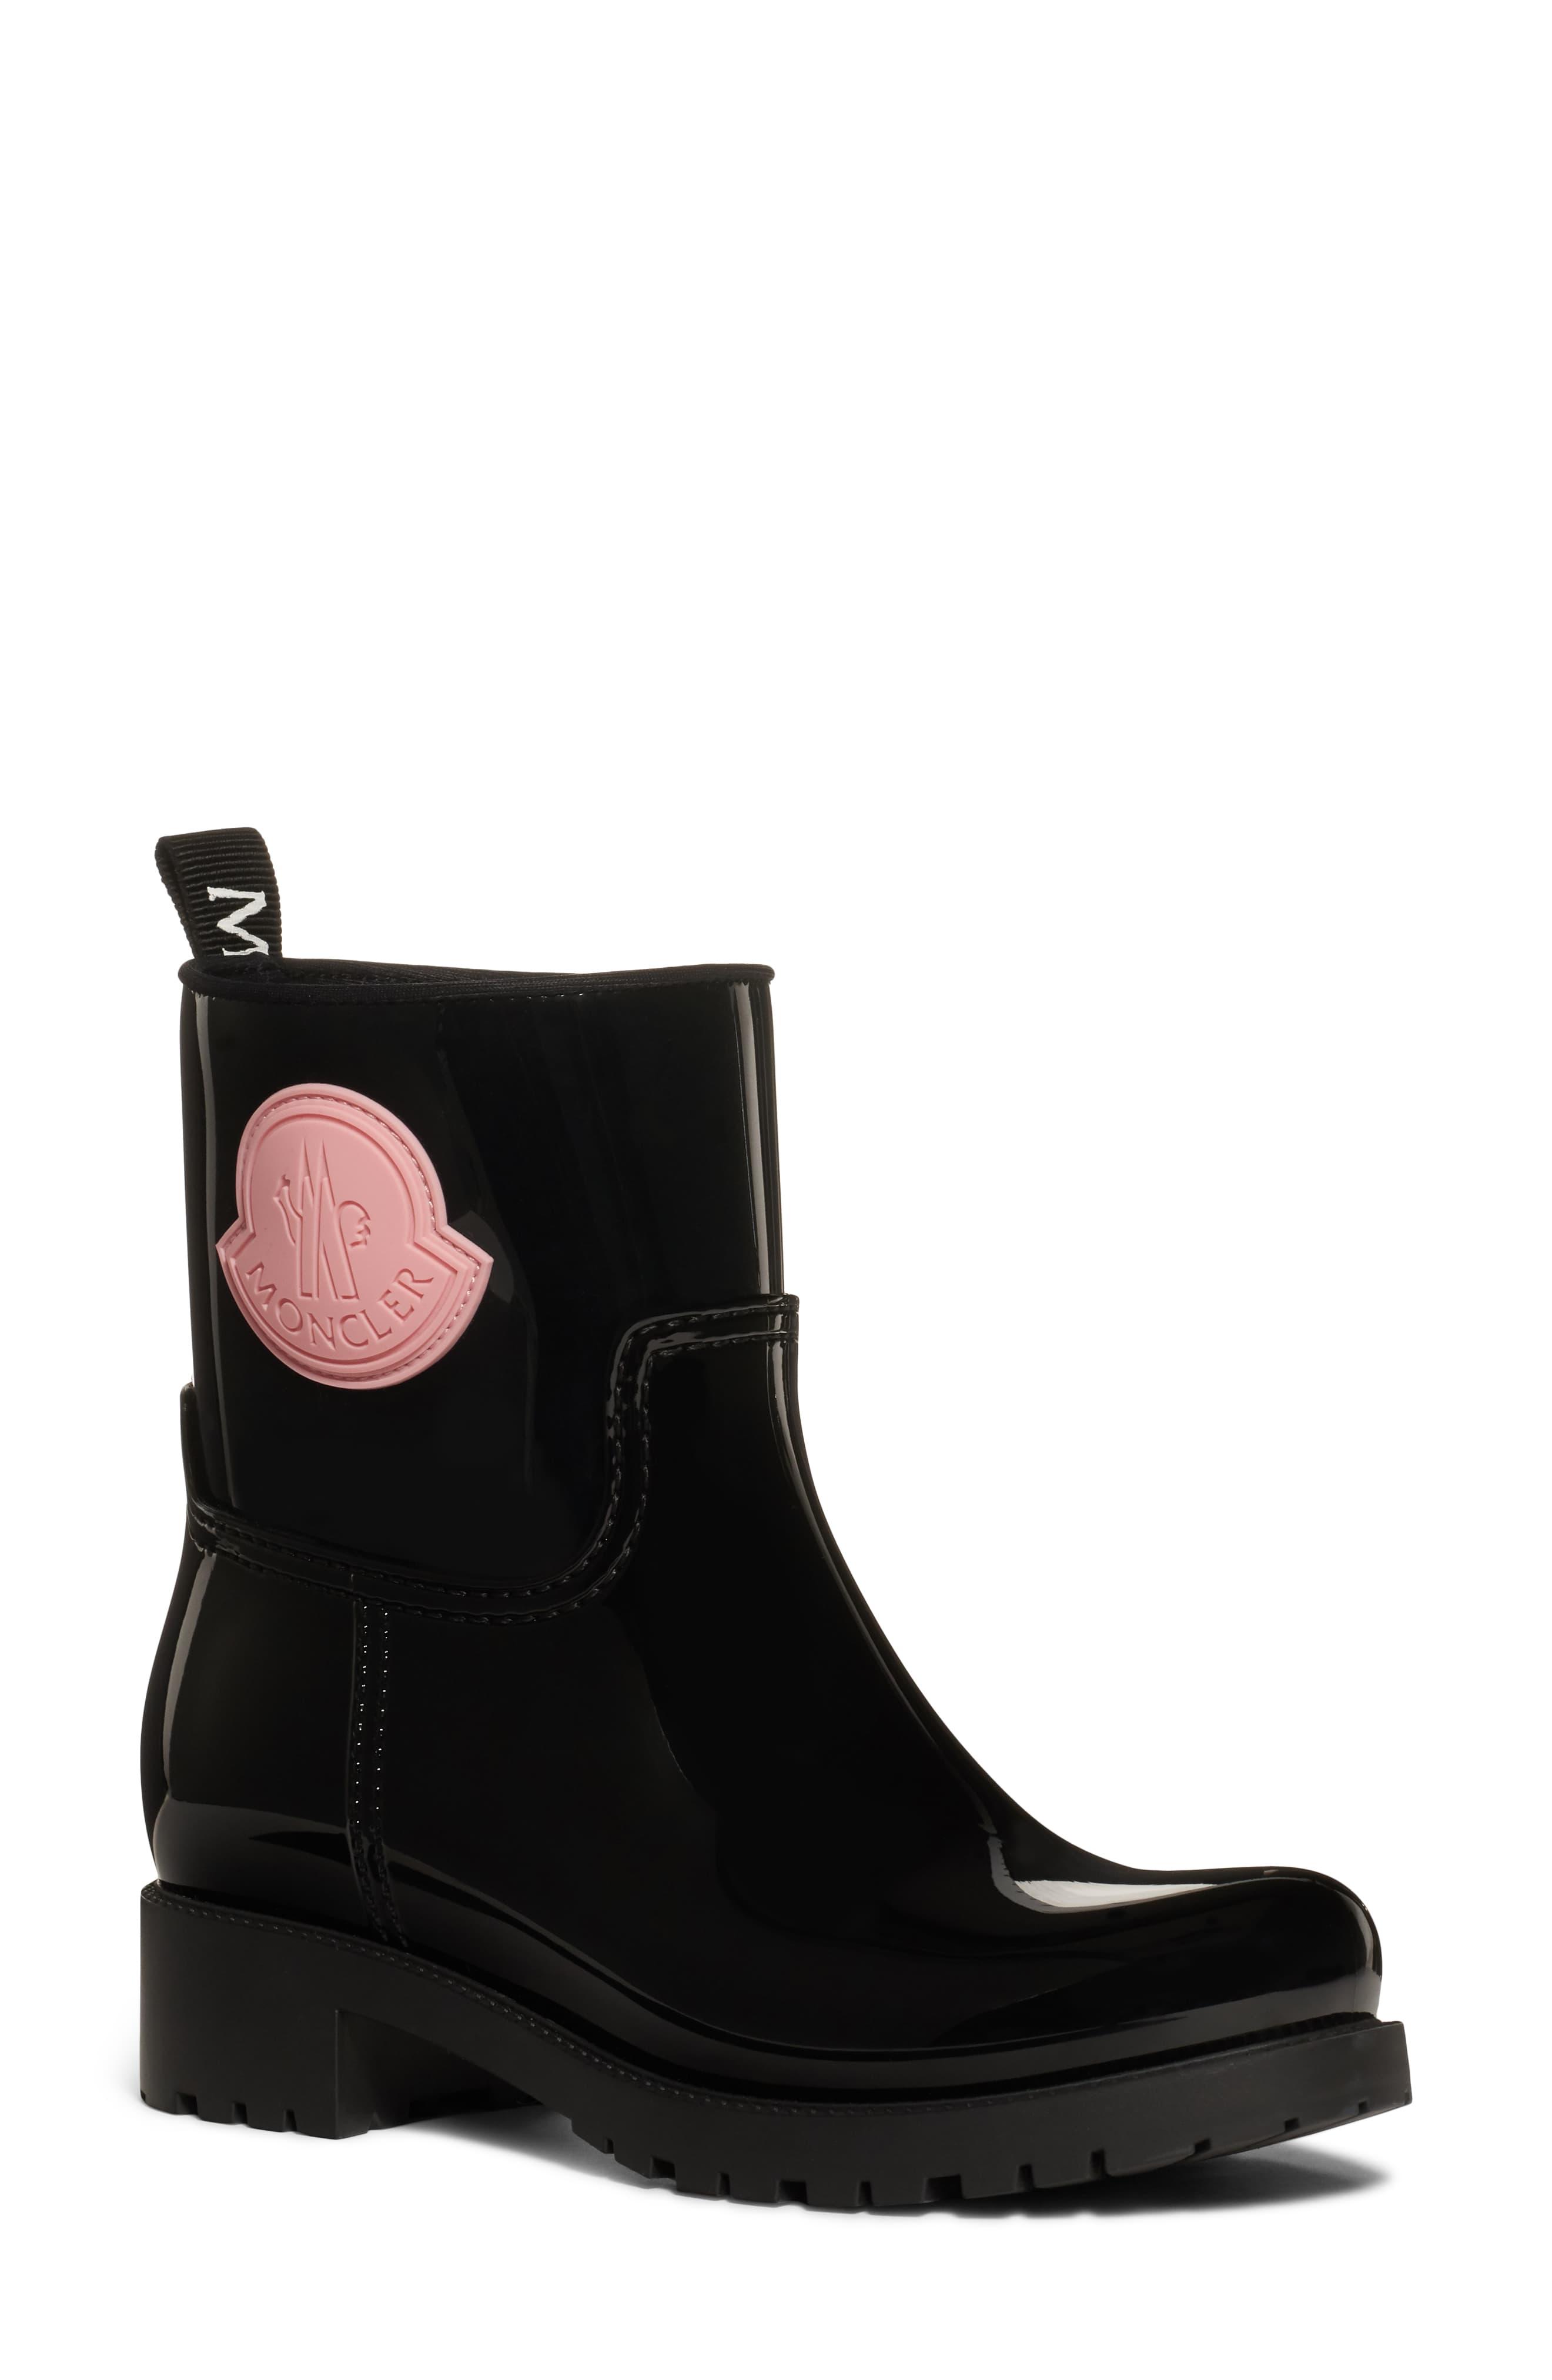 moncler pink boots